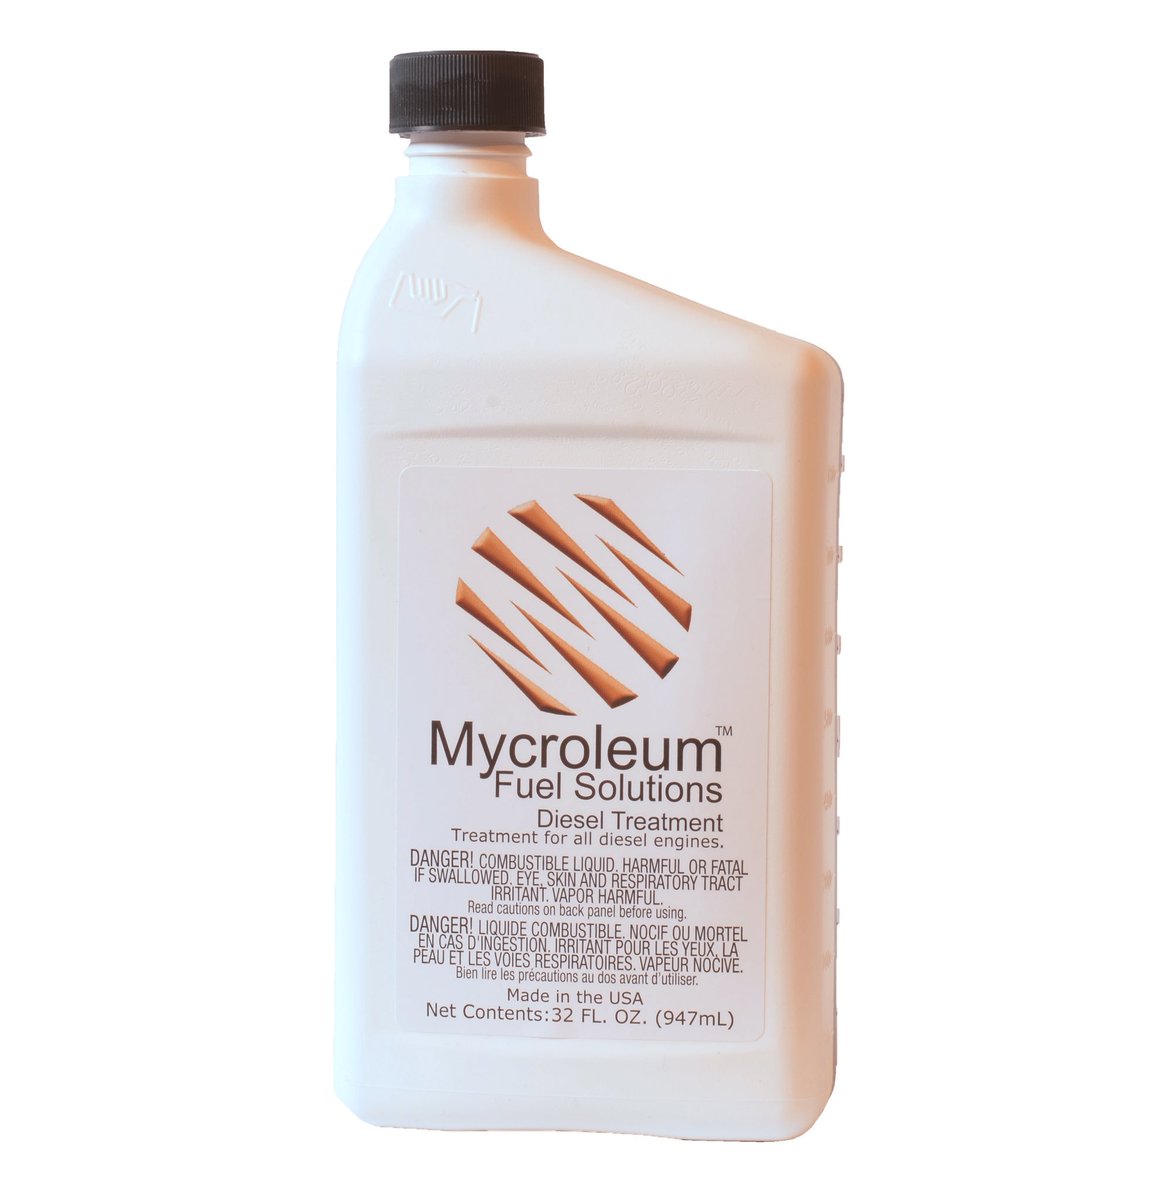 Mycroleum Fuel Solutions Diesel Treatment is a fully formulated, continuous use product keeping your fuel system operating at peak performance. Mycroleum is a complete fuel solution in one product. Mycroleum.com. #fueltreatment #mycroleum #fuelmileage #dieseltreatment